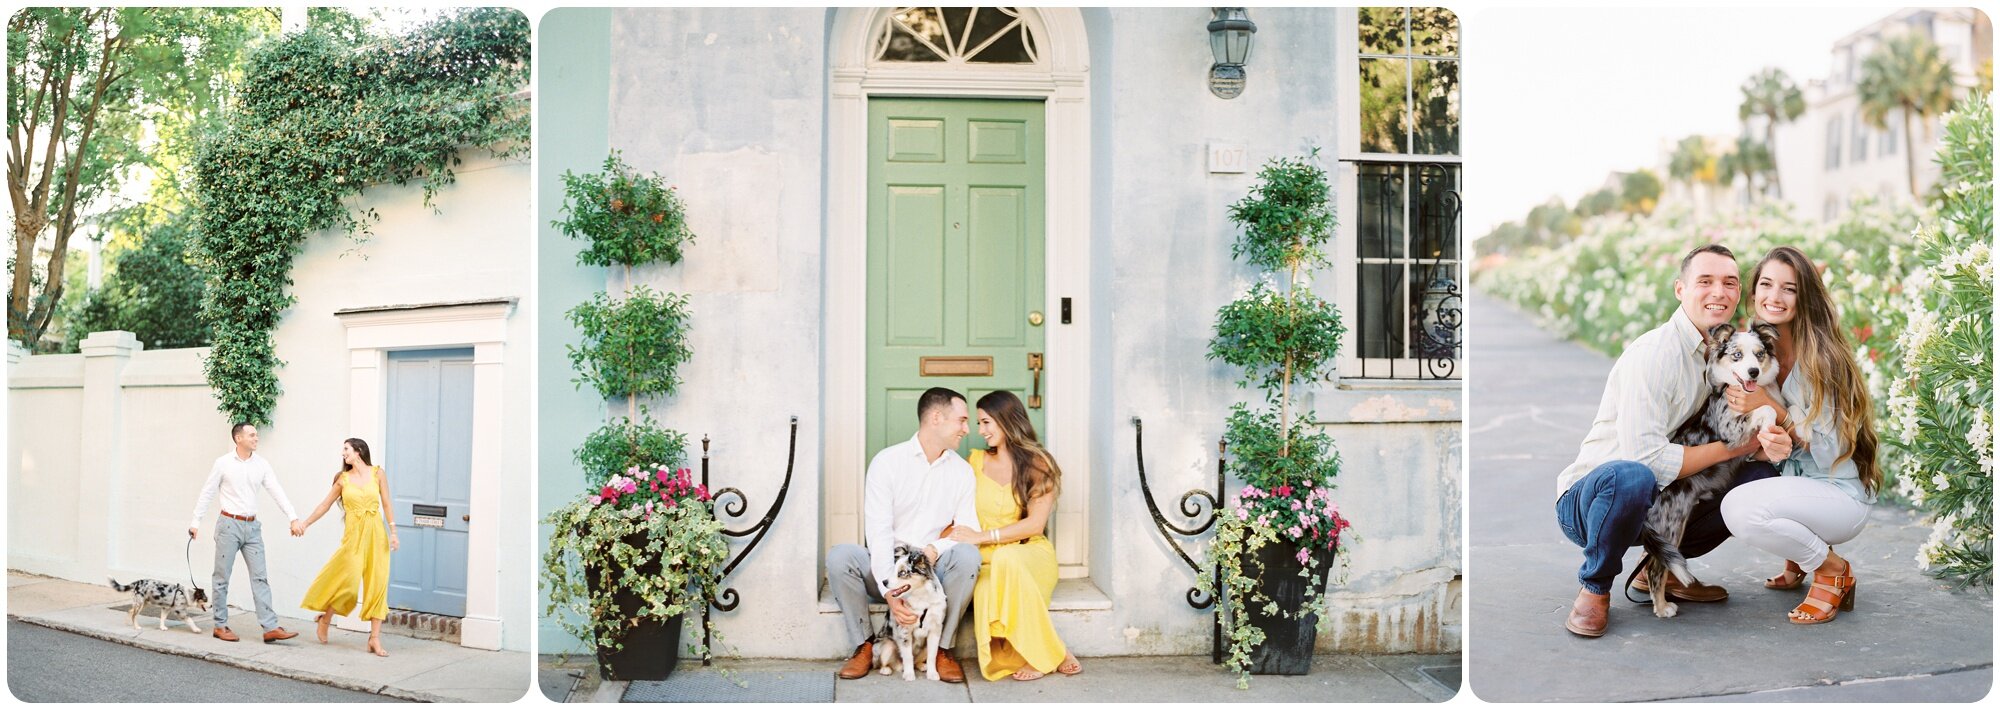 rainbow_row_yellow_blue_outfit_battery_downtown_charleston_engagement_puppy_outdoor_wedding_photographers_husband_wife_team_kailee_tim_kailee_dimeglio_photography_charleston_traveling_photographers_0009.jpg